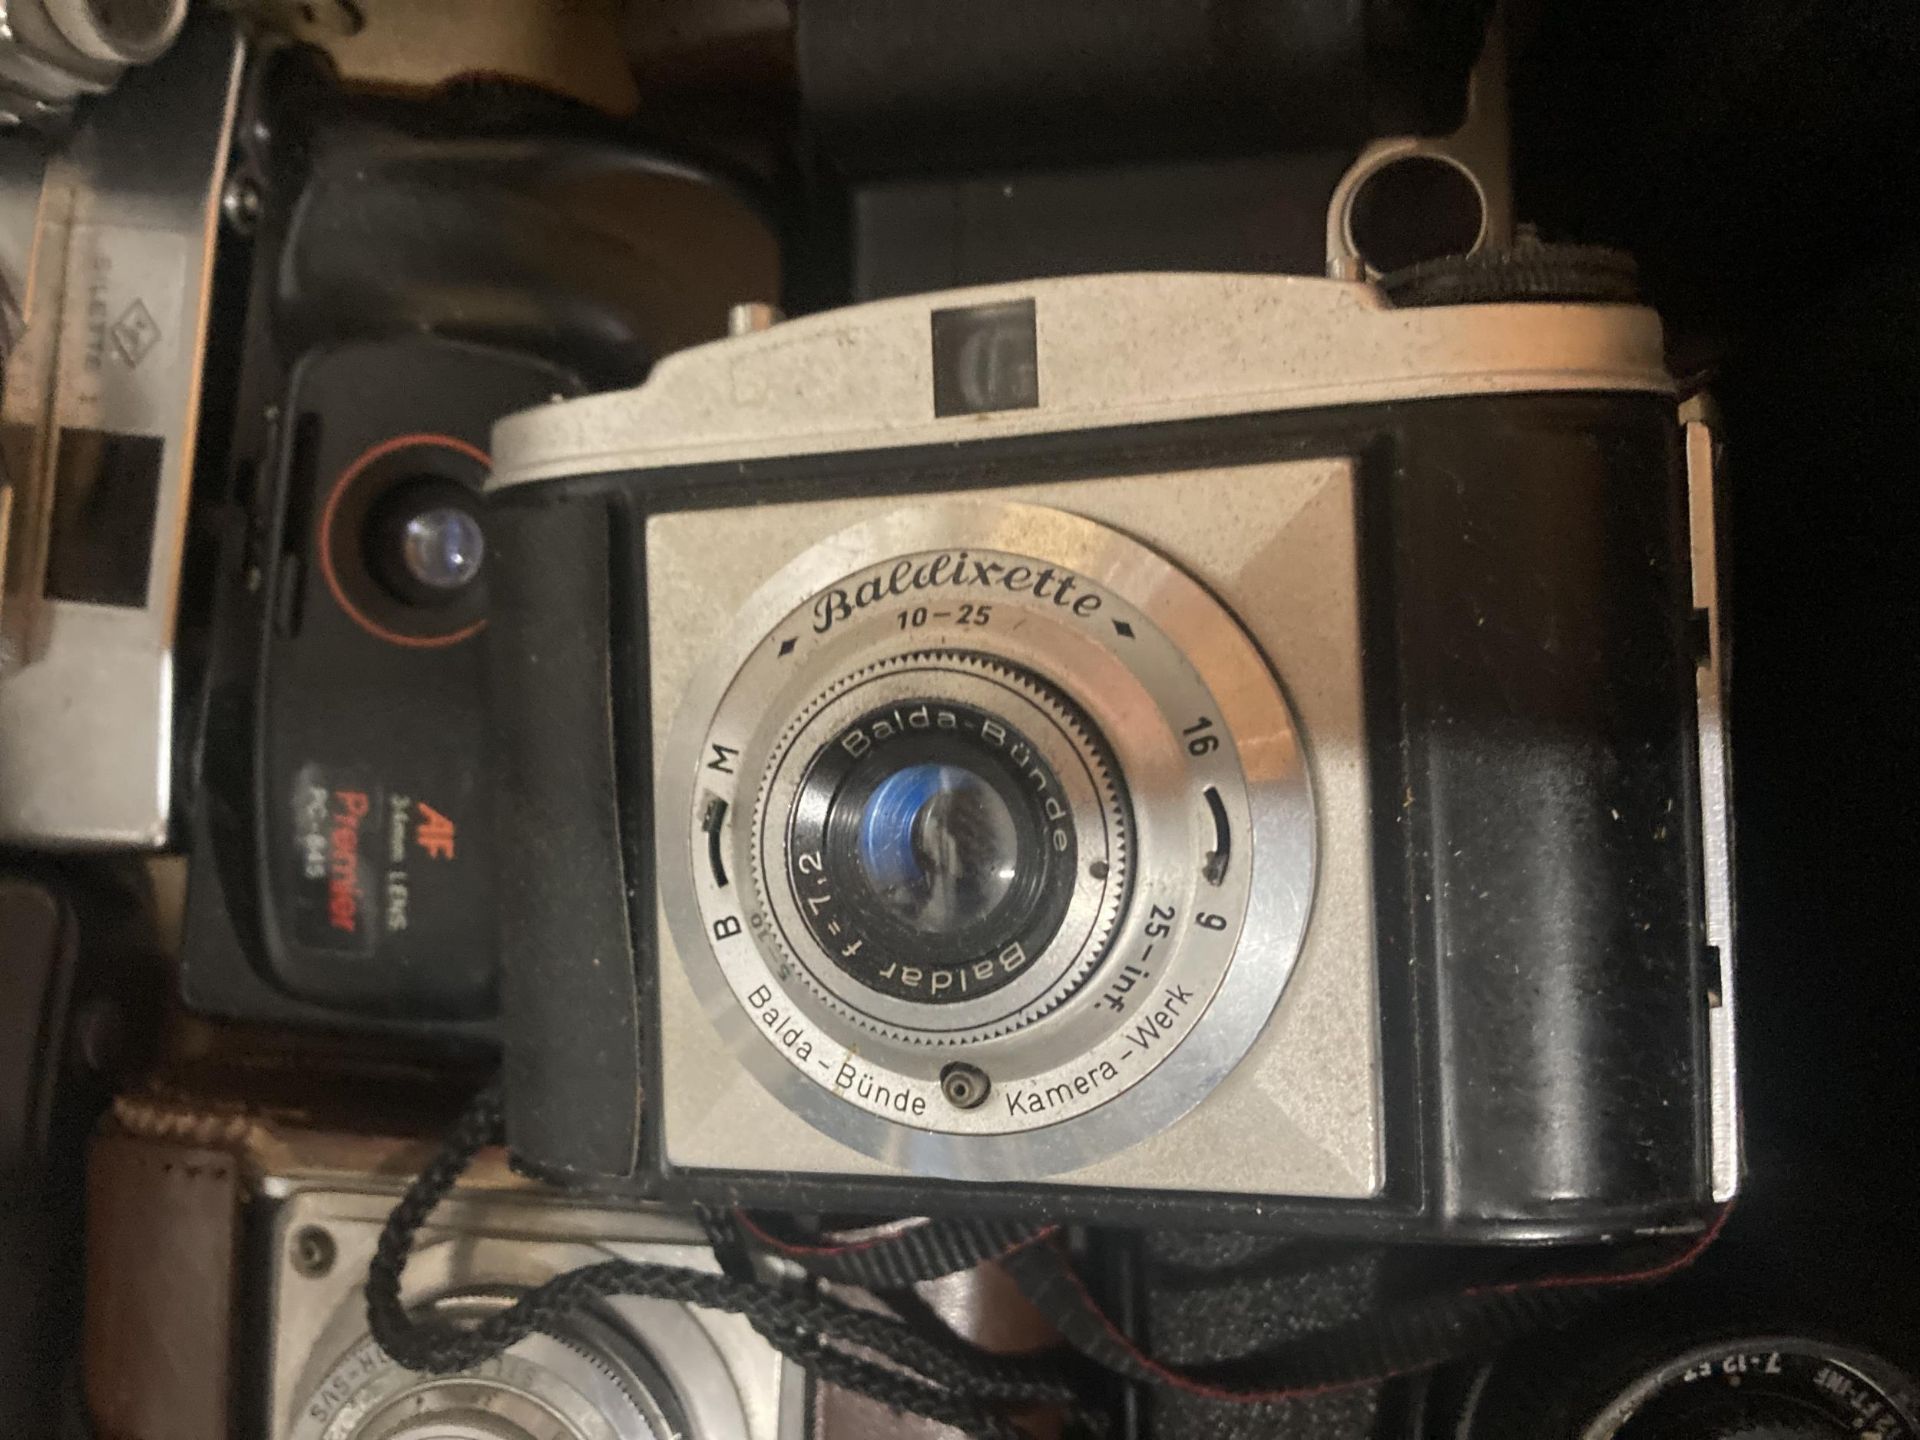 A LARGE QUANTITY OF VINTAGE CAMERAS TO INCLUDE CANON, ENSIGN, KODAK BROWNIE, ETC - 26 IN TOTAL - Image 6 of 7